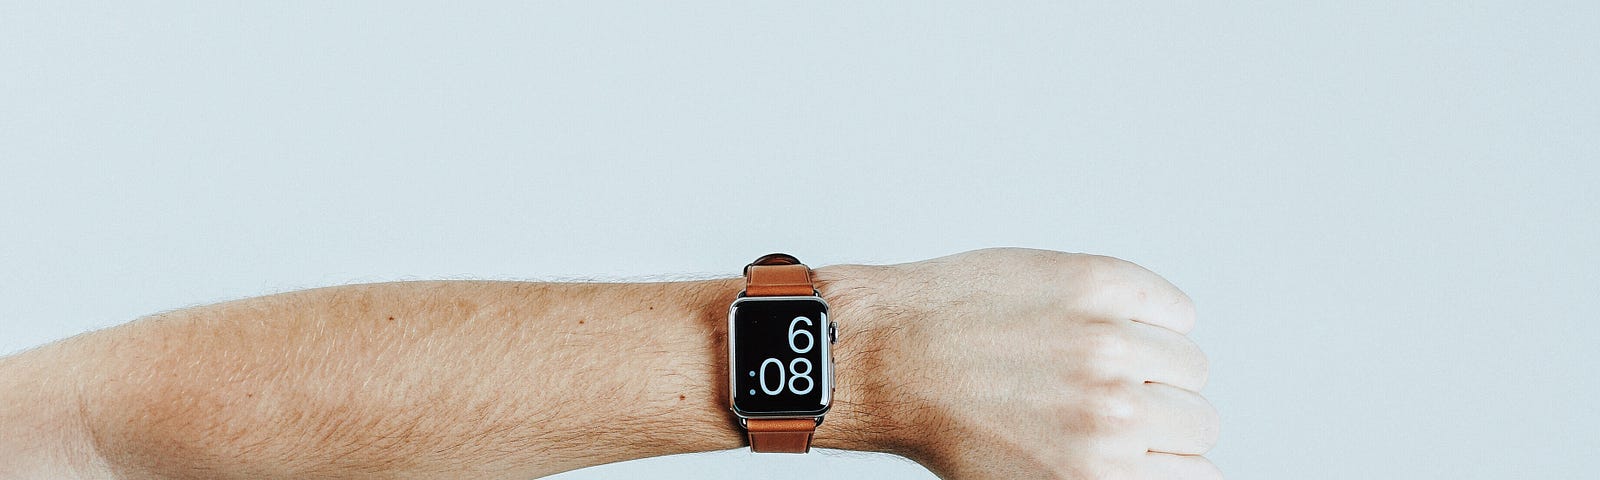 Simple picture of arm with an Apple Watch showing the time with a white background.